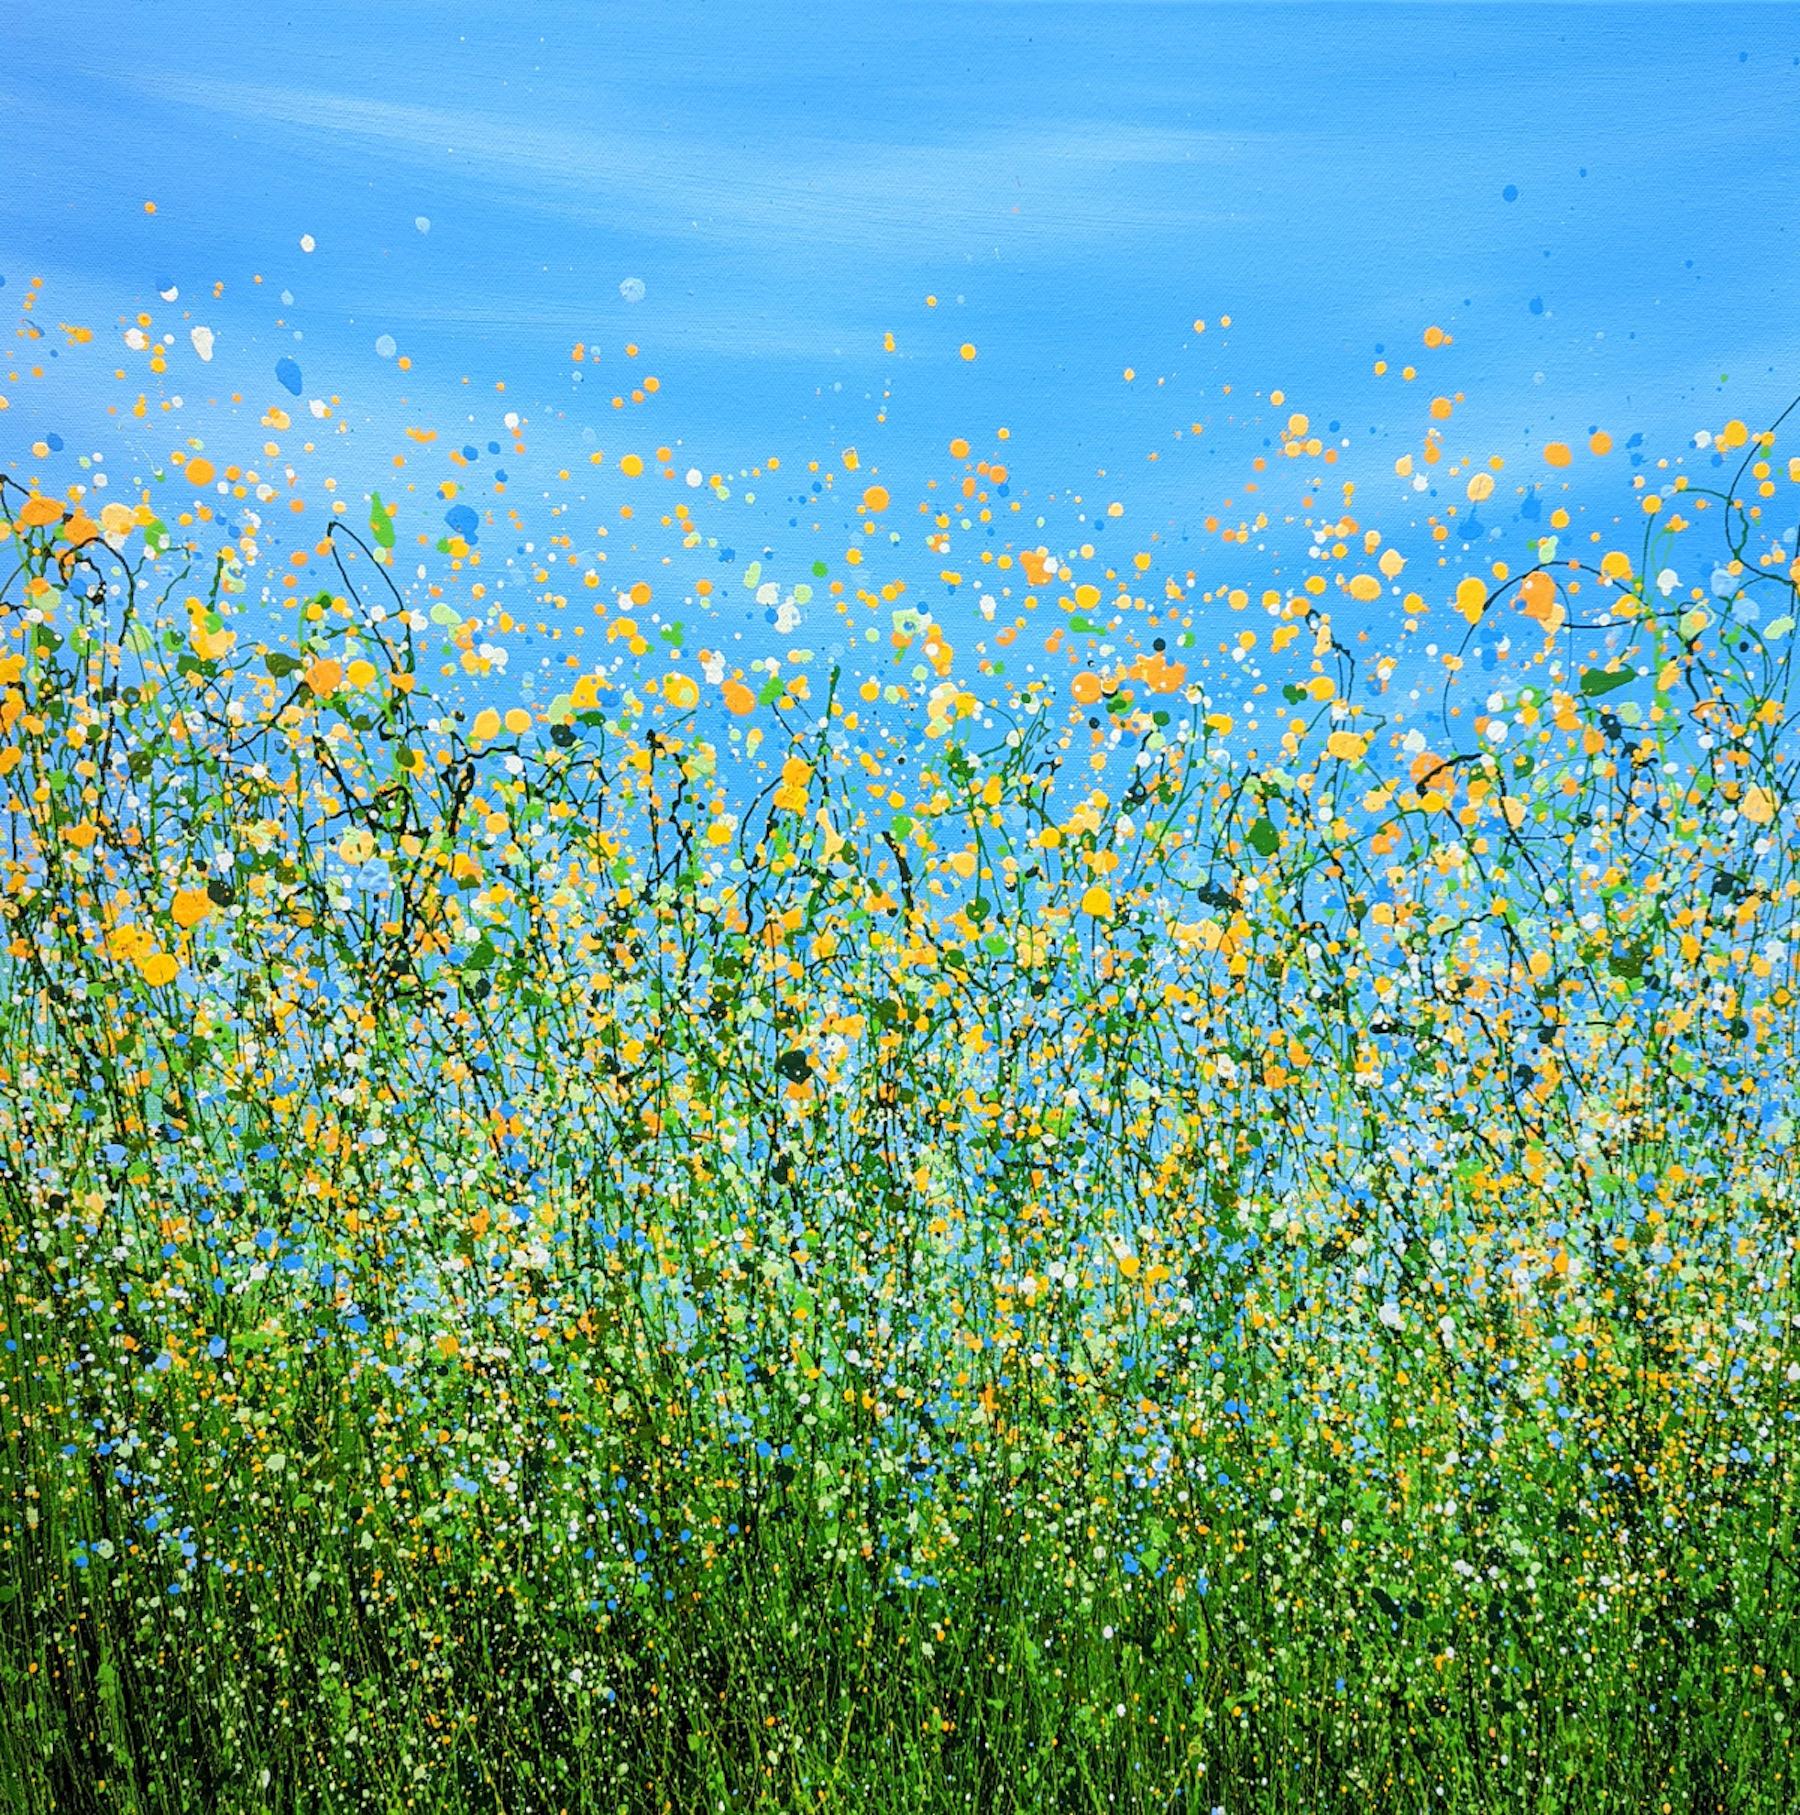 Sunny Side Up #3, Abstraktes expressionistisches Landschaftsgemälde, Meadow Painting